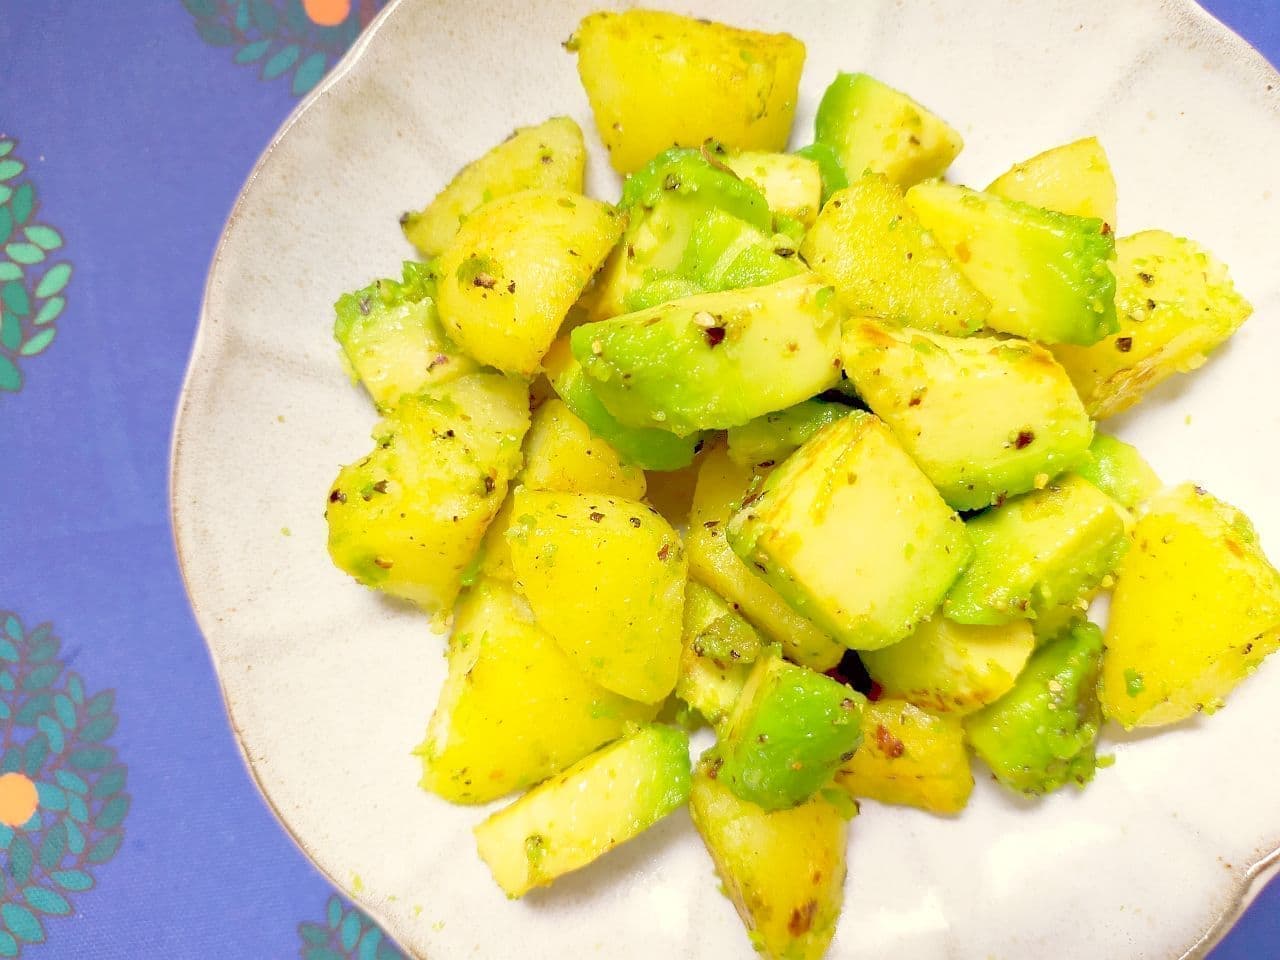 Recipe for "Fried Potatoes and Avocado with Garlic